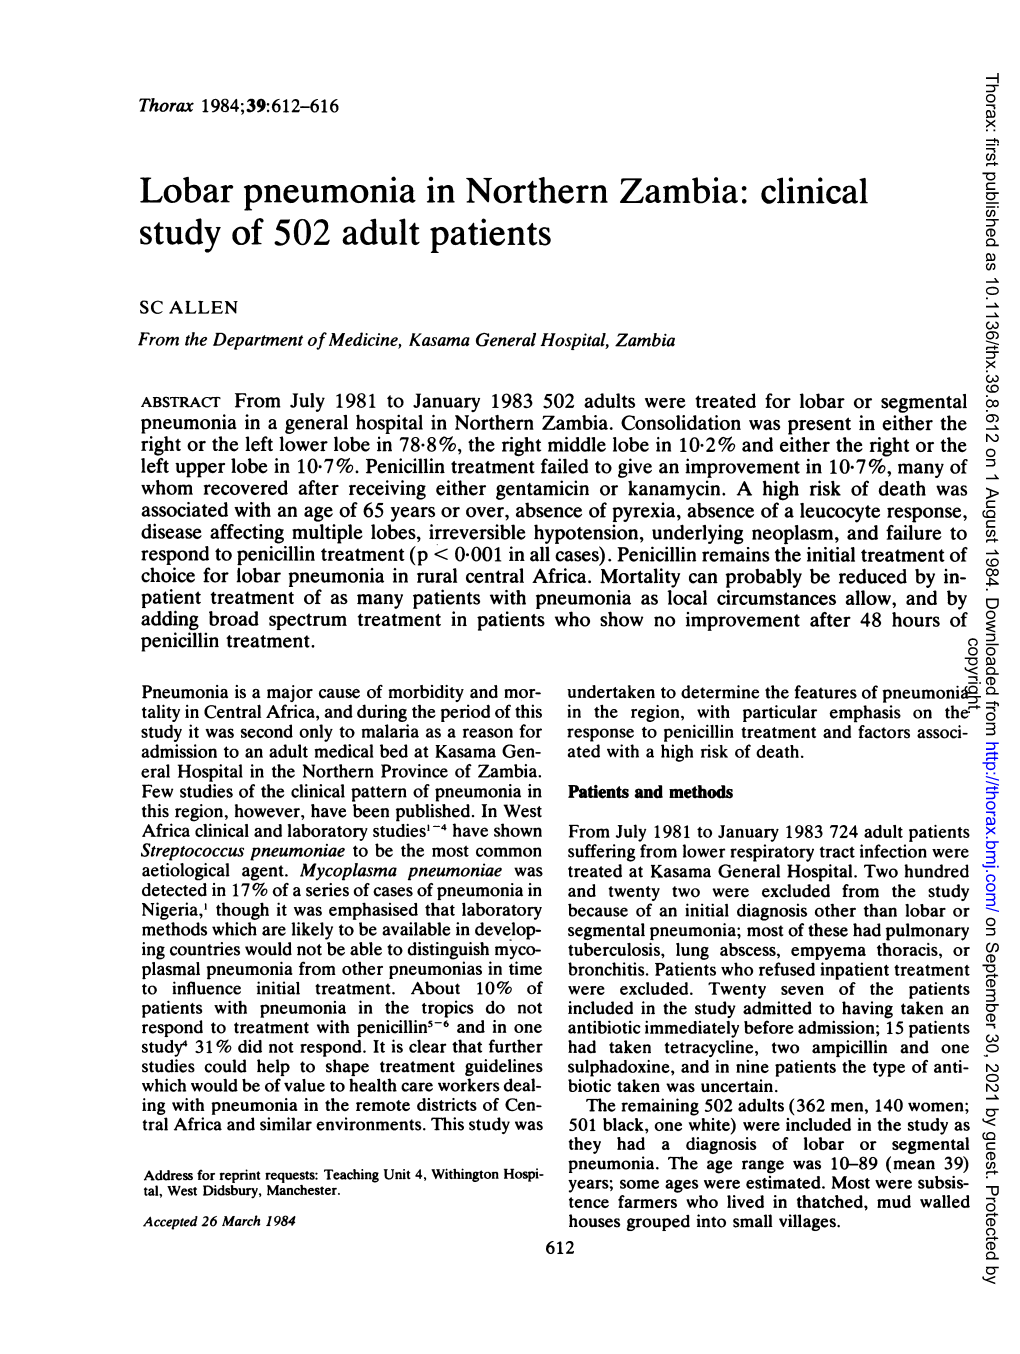 Lobar Pneumonia in Northern Zambia: Clinical Study of 502 Adult Patients